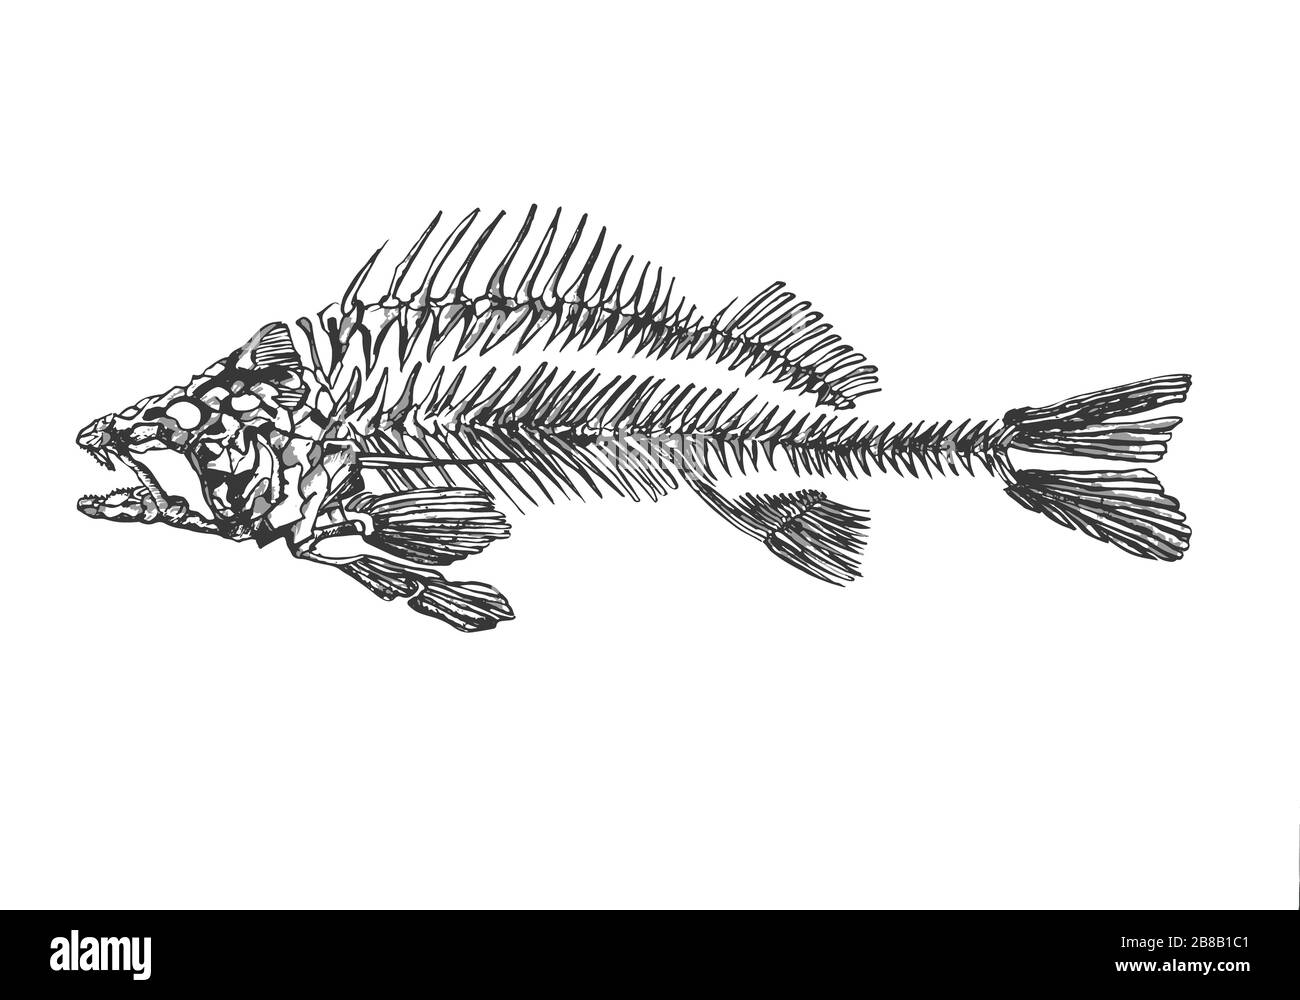 abstract and liniar fish skeleton sketch drawing Stock Photo - Alamy